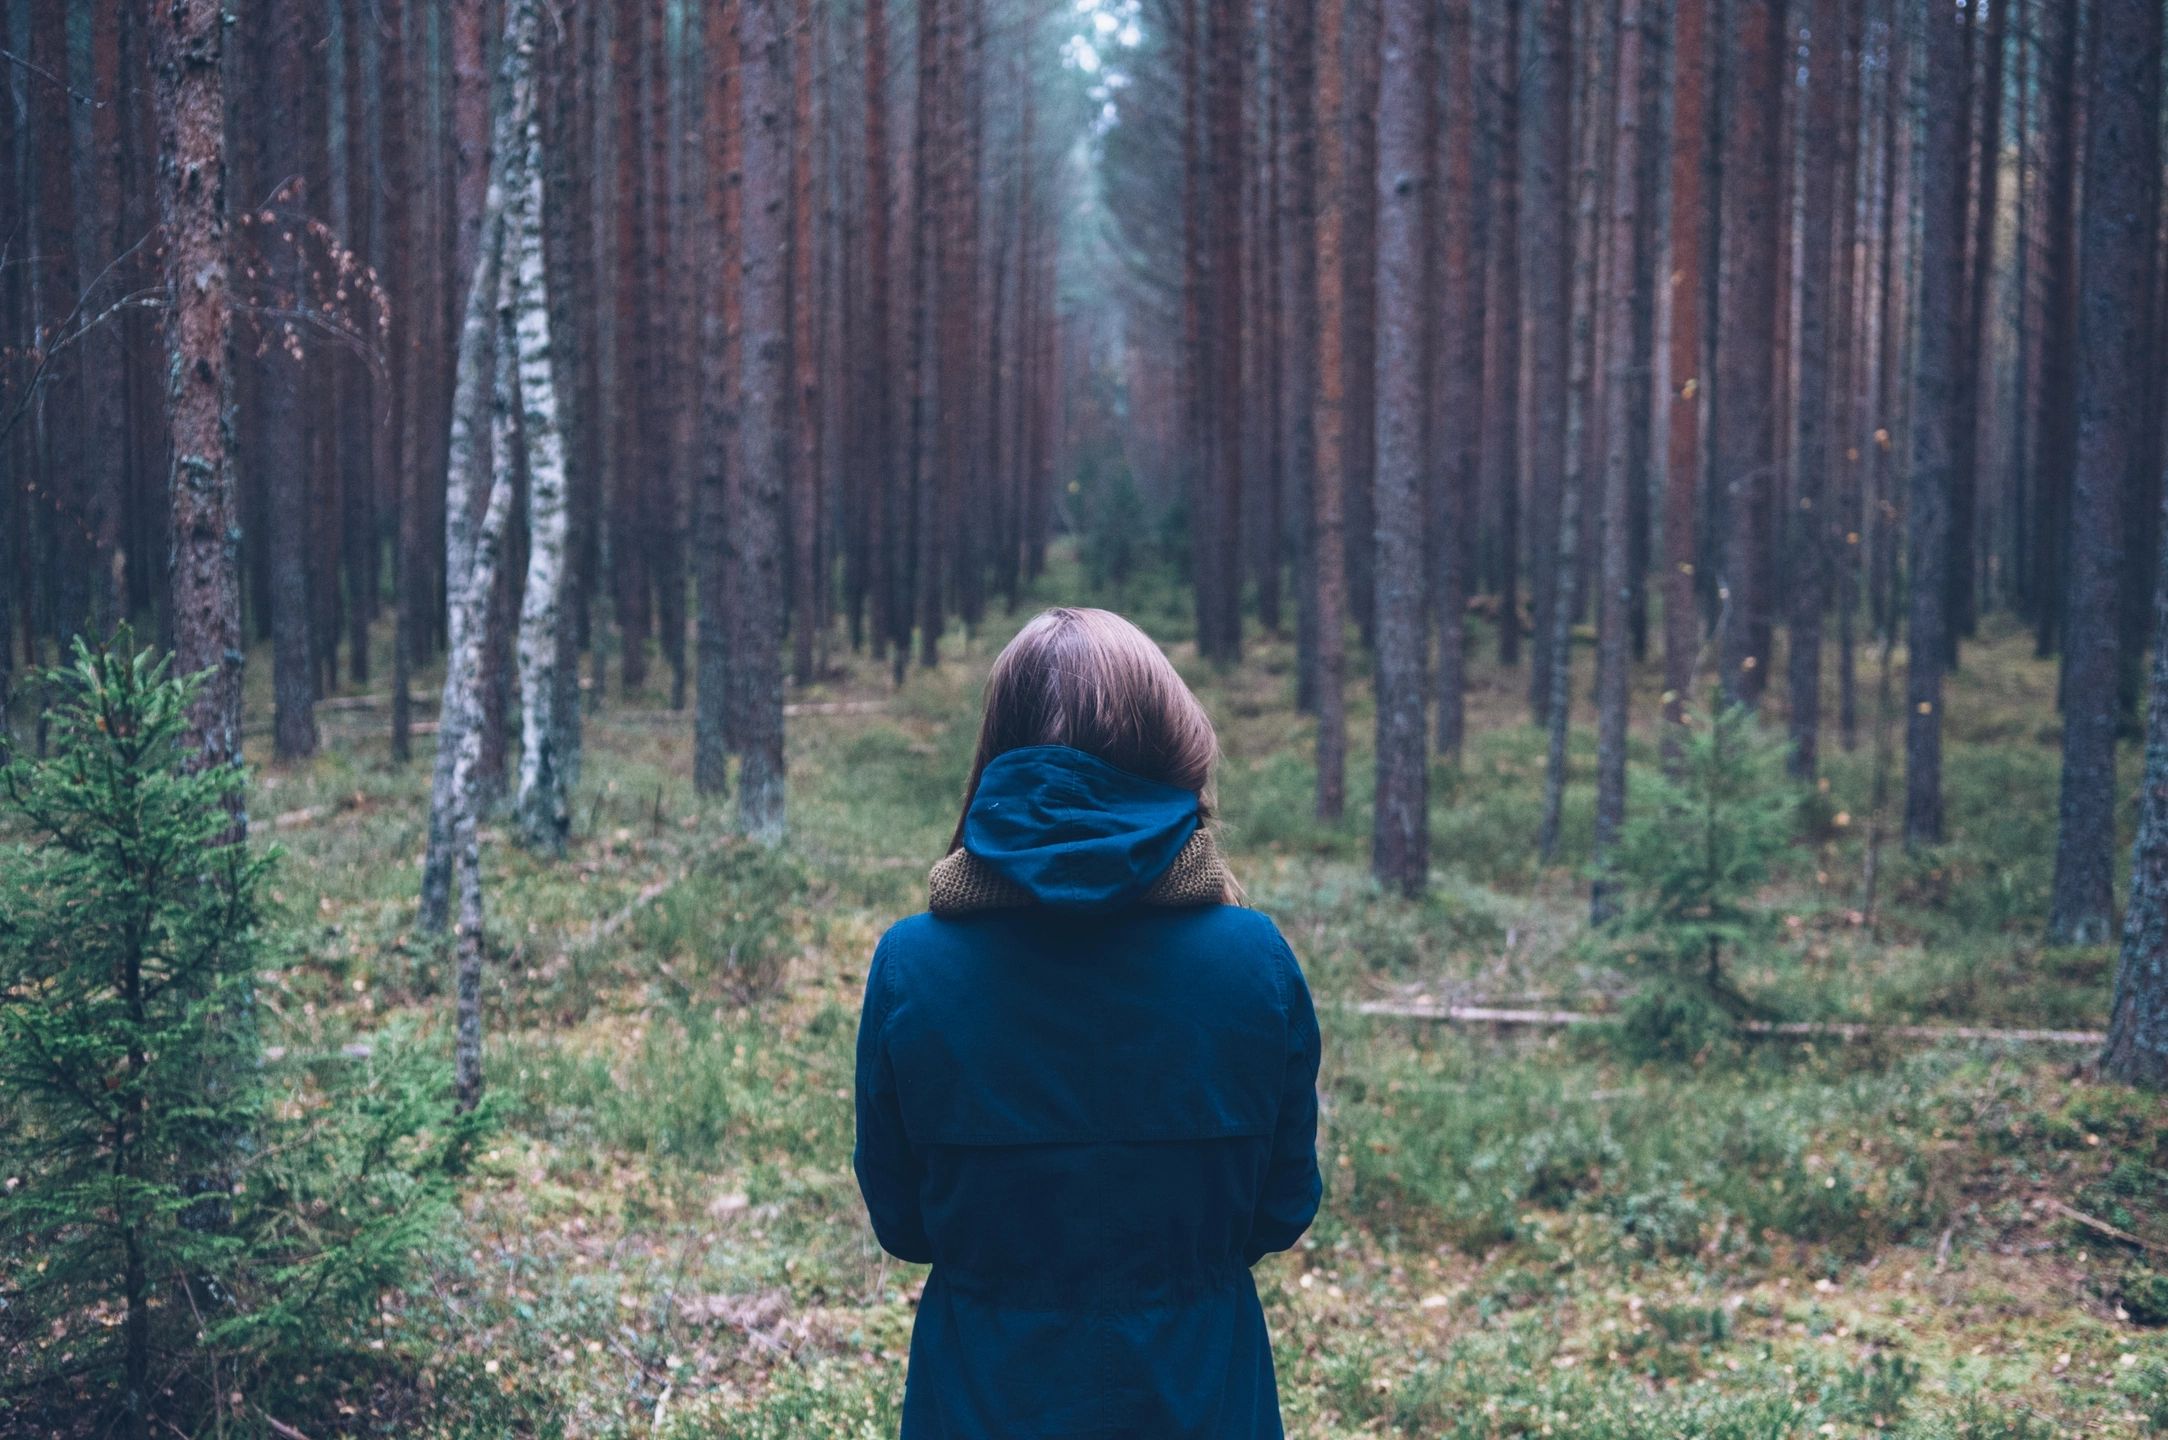 The back of a woman wearing a navy-blue winter coat in the middle of a forest full of tall trees